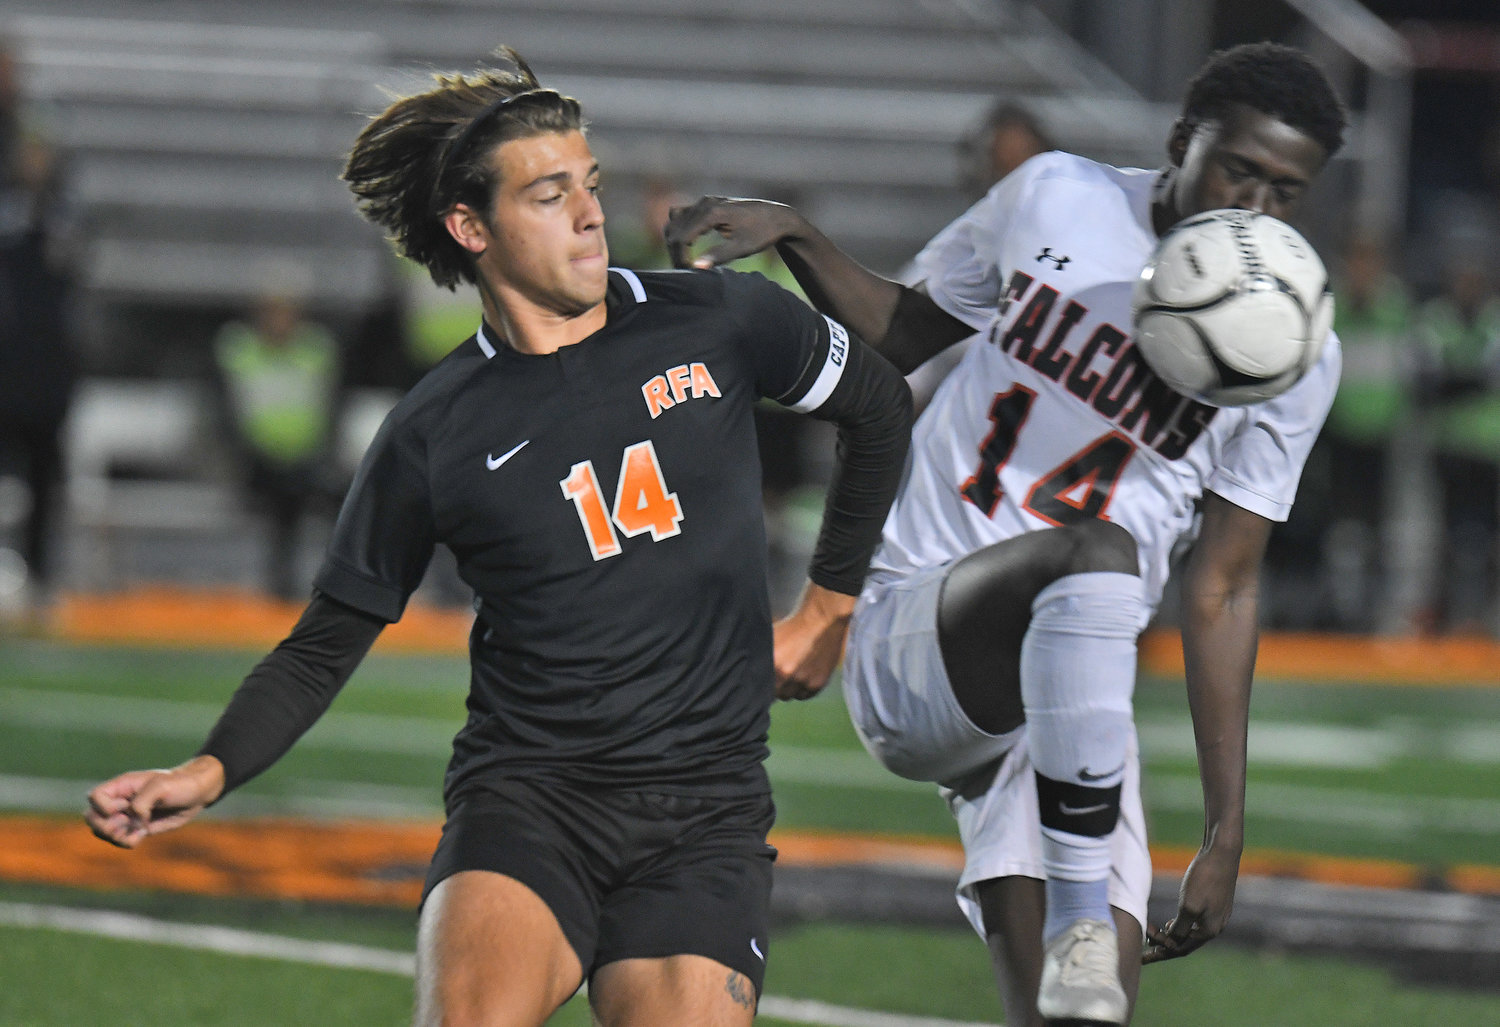 Collin Gannon of Rome Free Academy, left, turns as Fowler's Simon Irankunda controls the ball in the first half Wednesday night at RFA Stadium. RFA won 1-0 on a late goal to advance to the quarterfinals of the Section III Class AA playoffs.